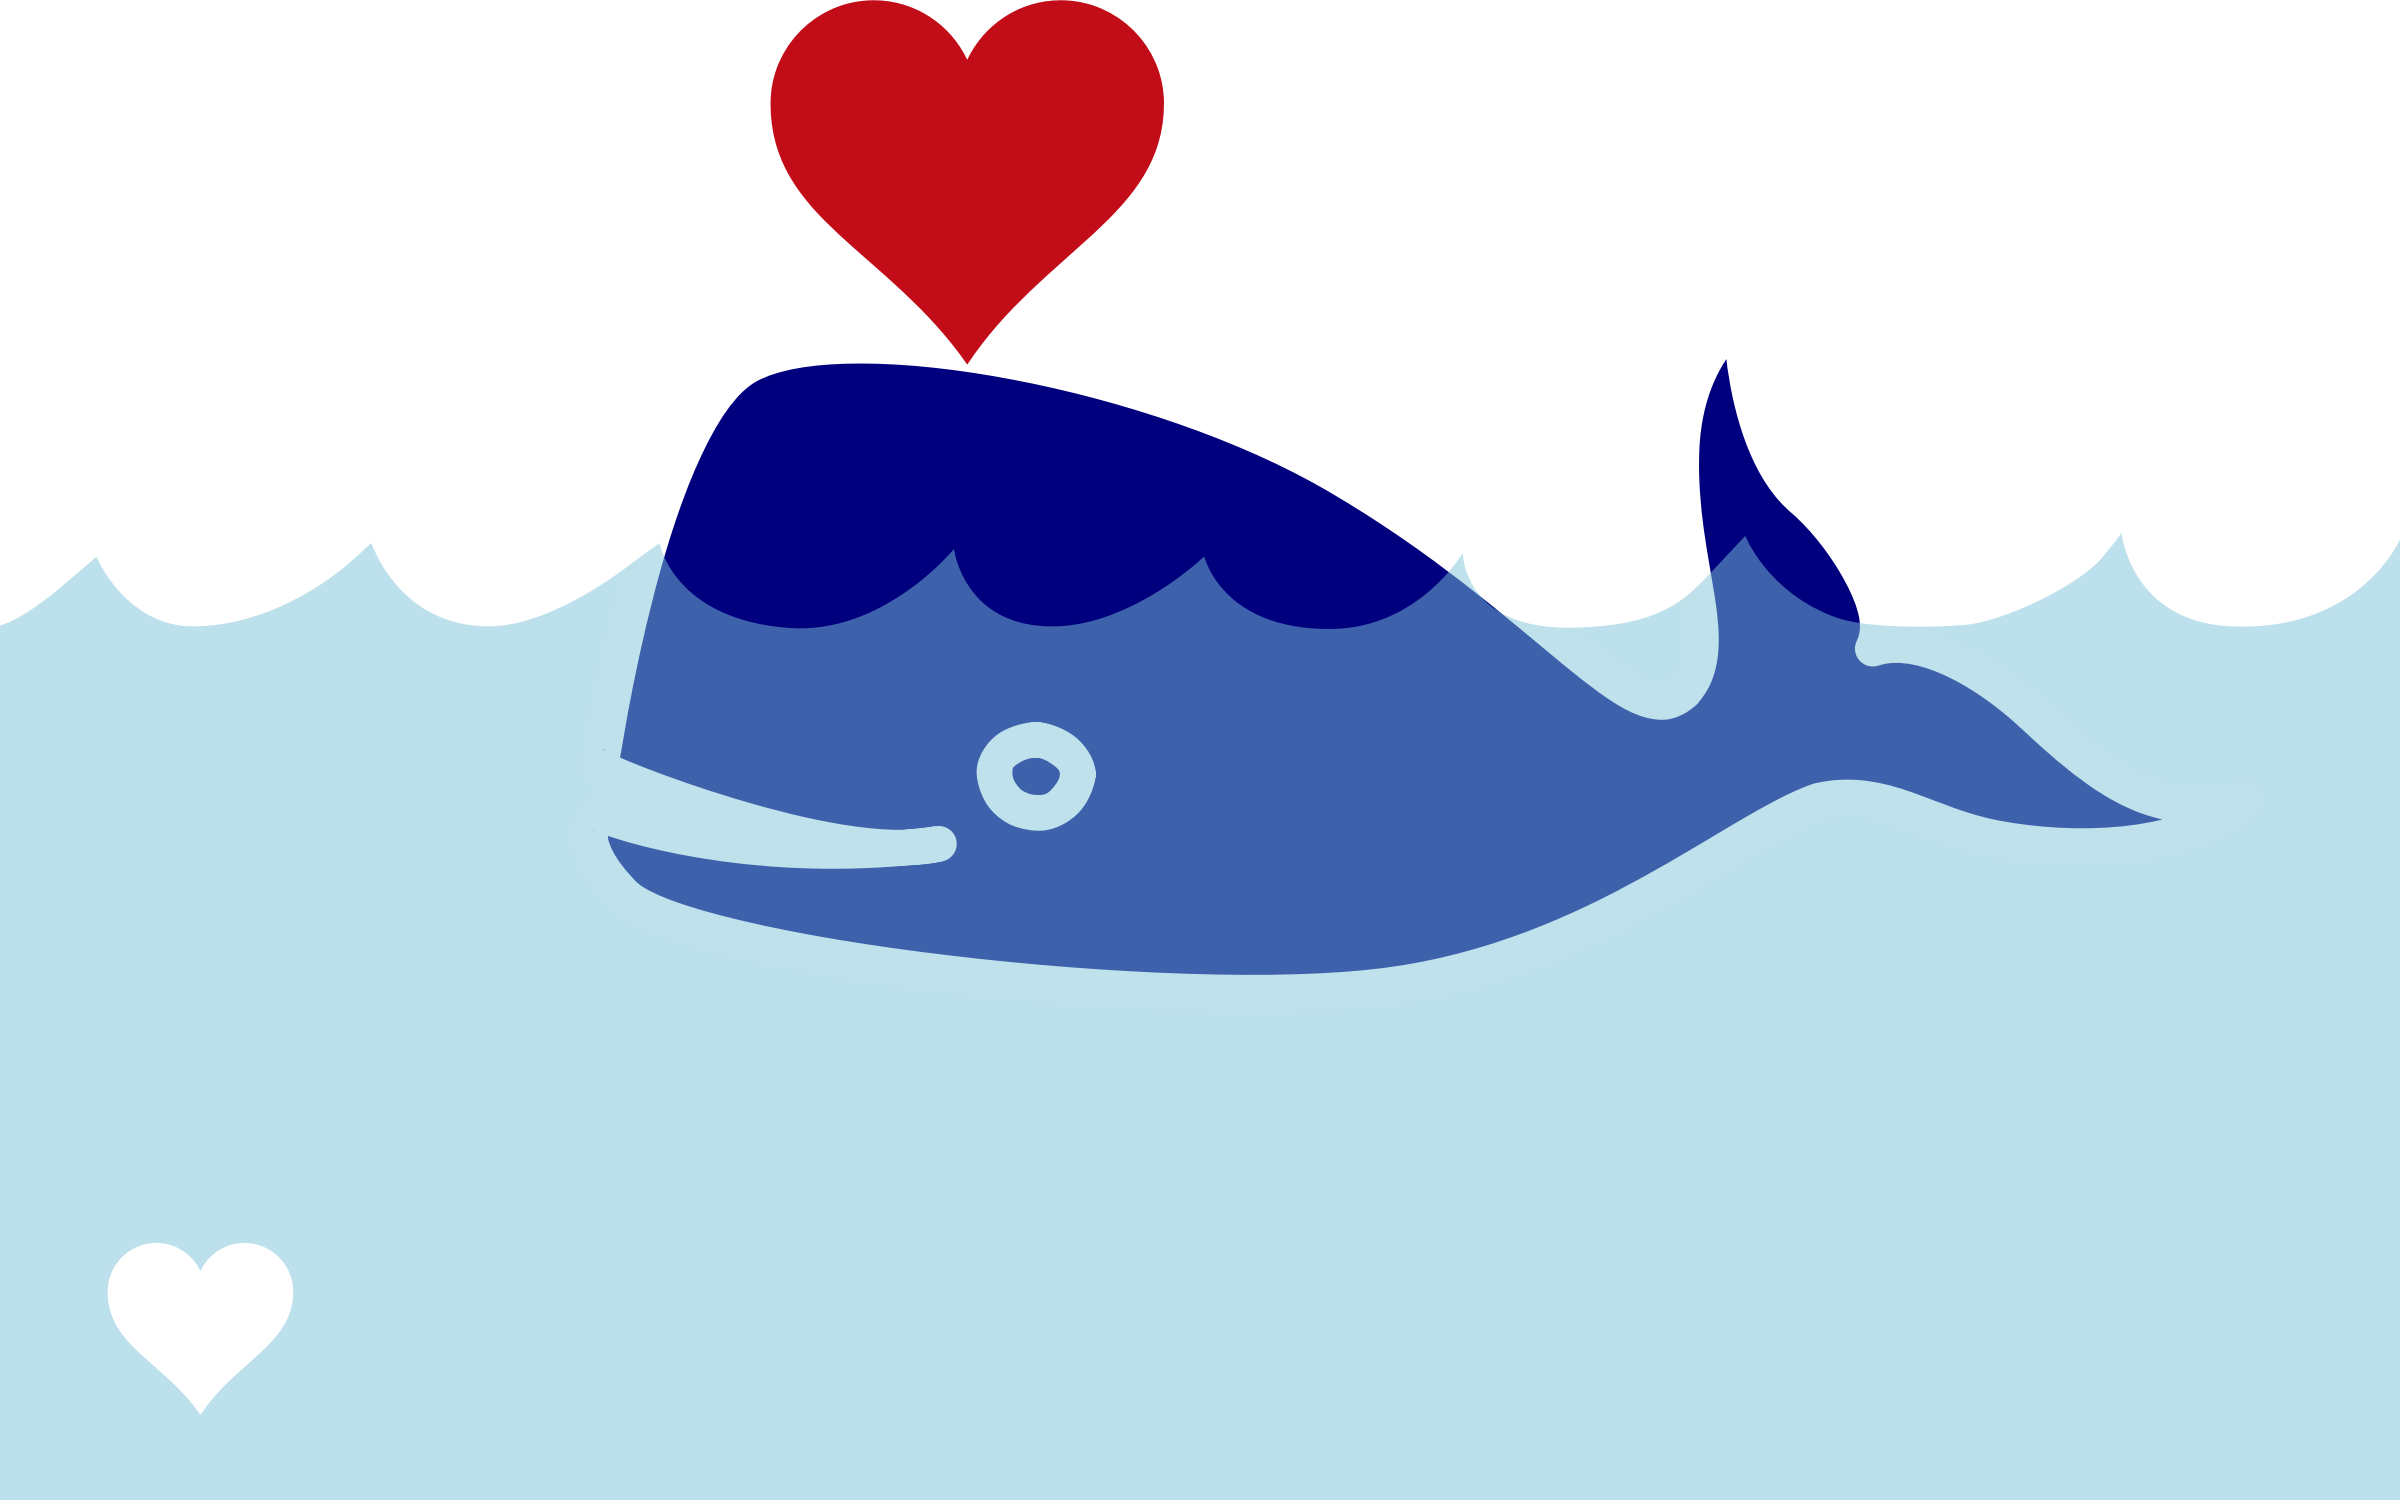 https://openclipart.org/image/2400px/svg_to_png/221592/Whale.png